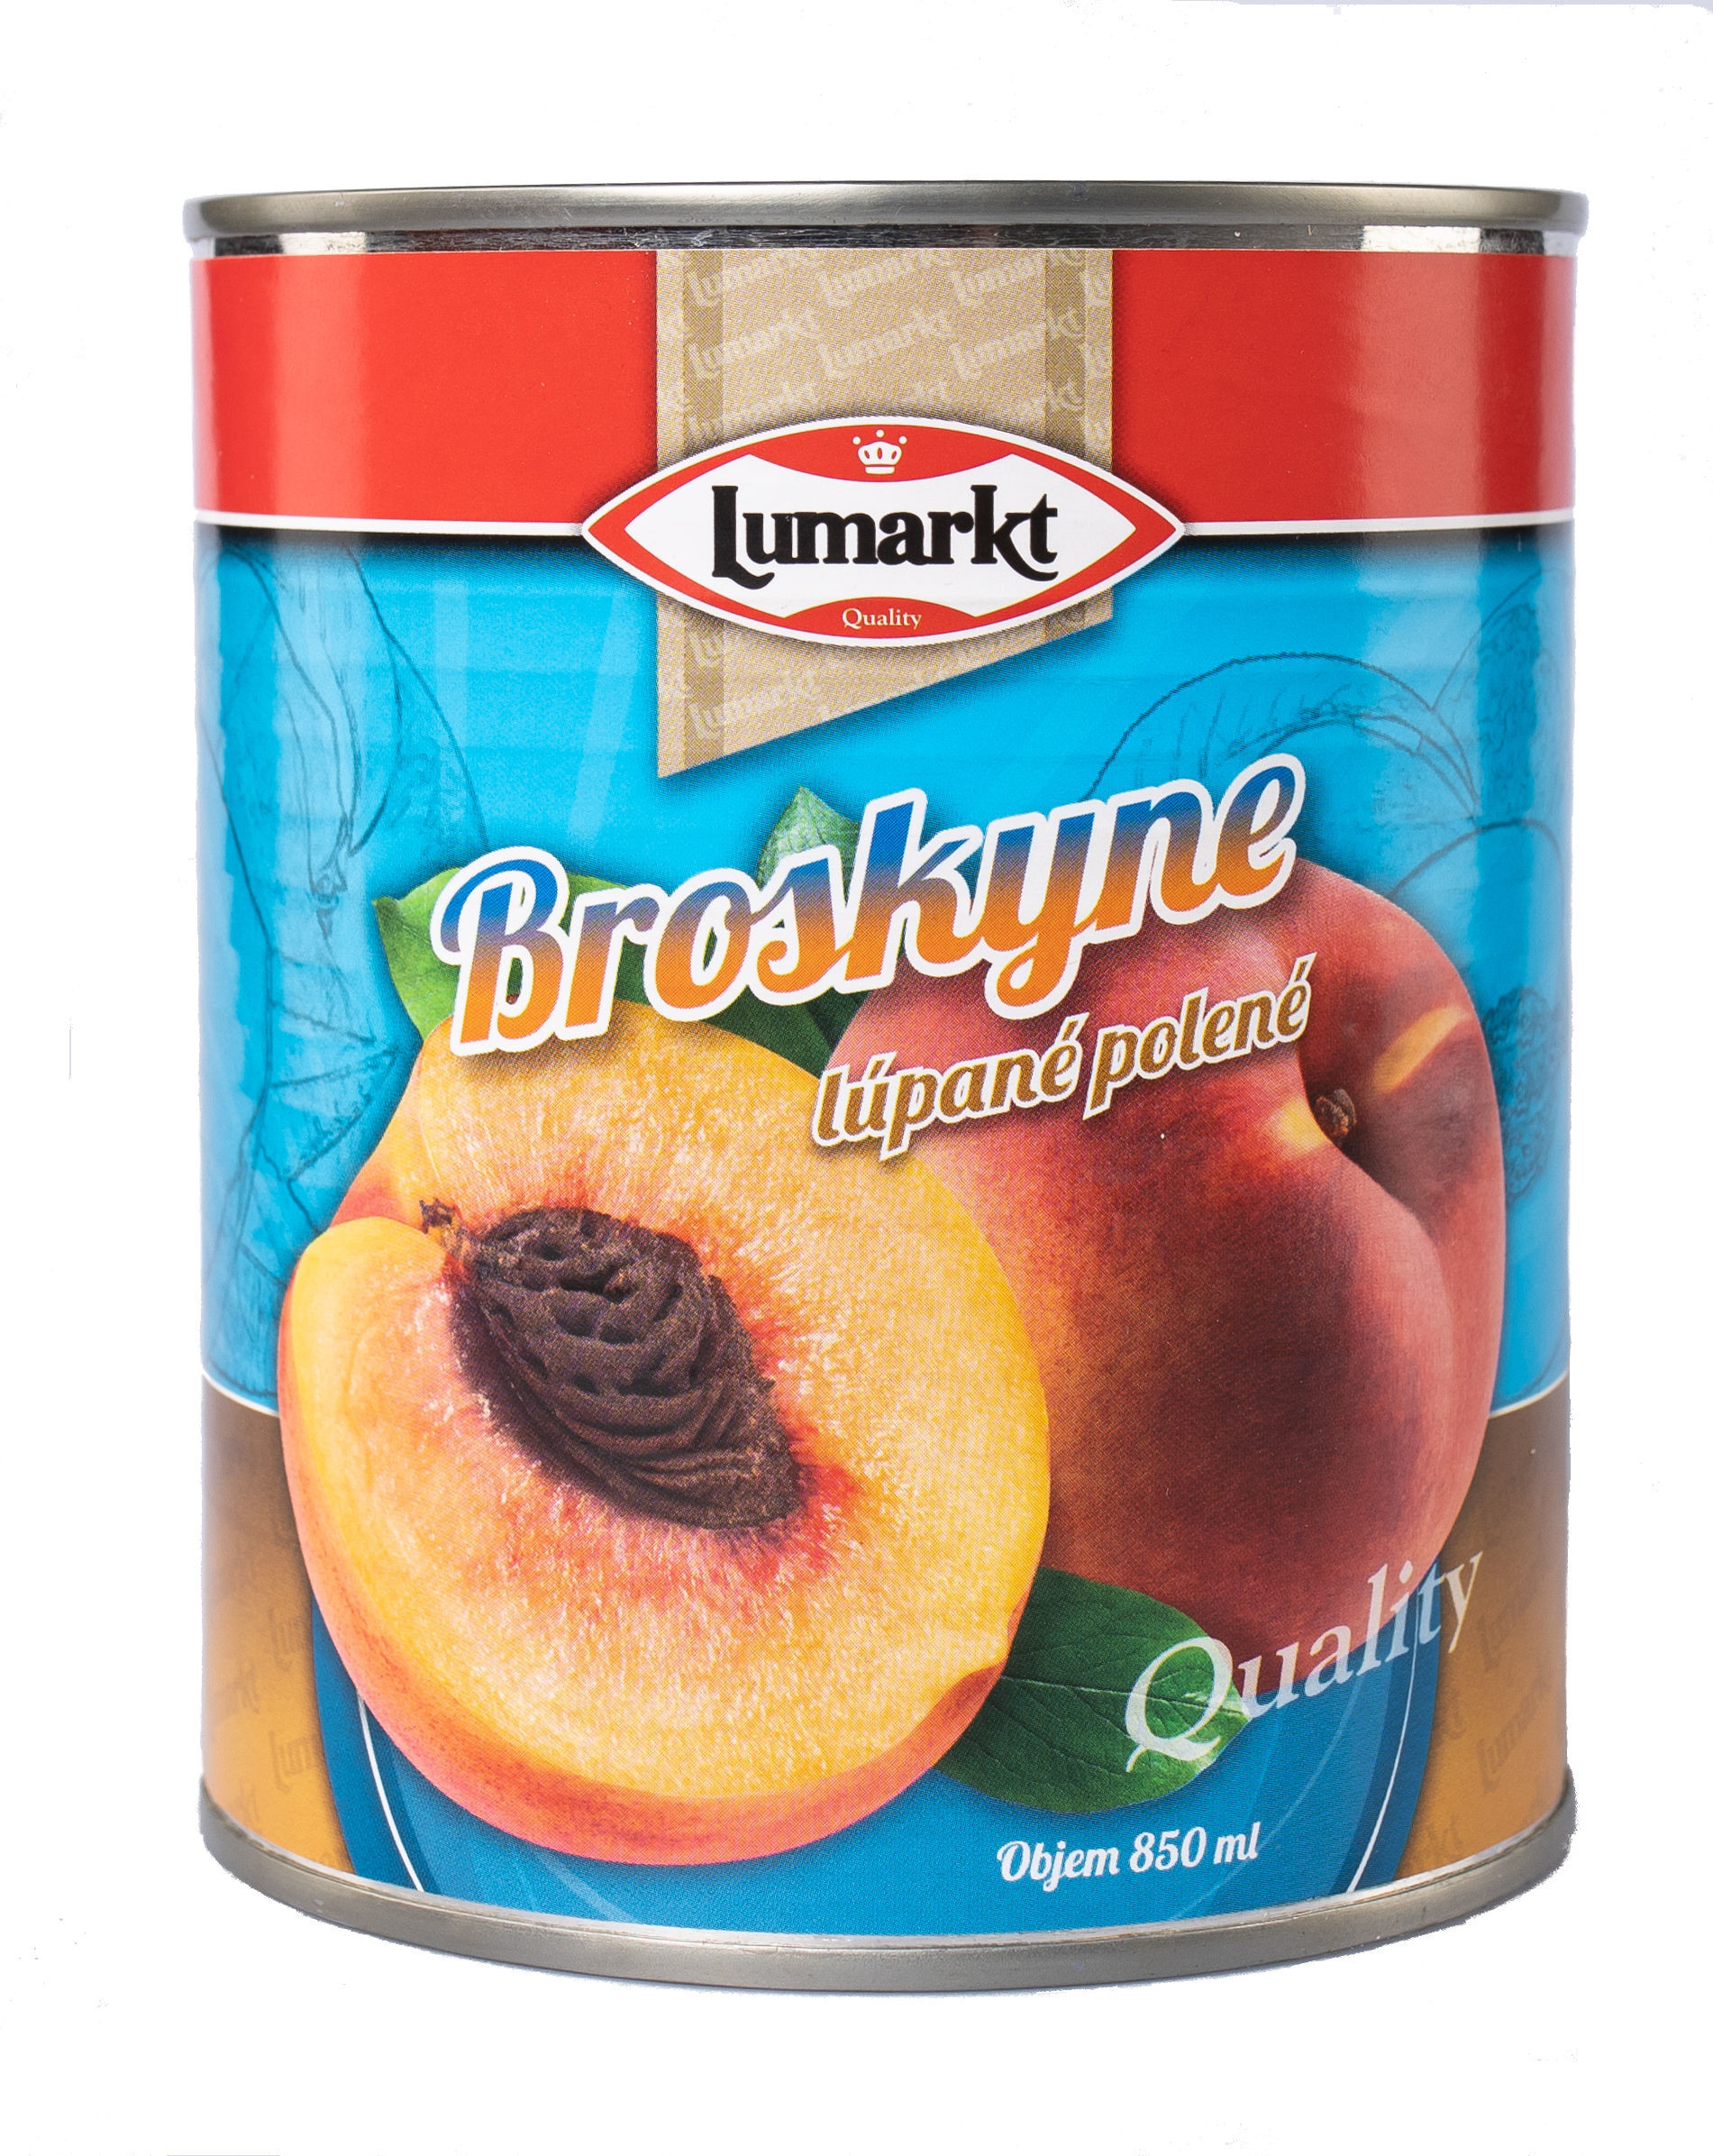 Peach compote - peeled halves (can)